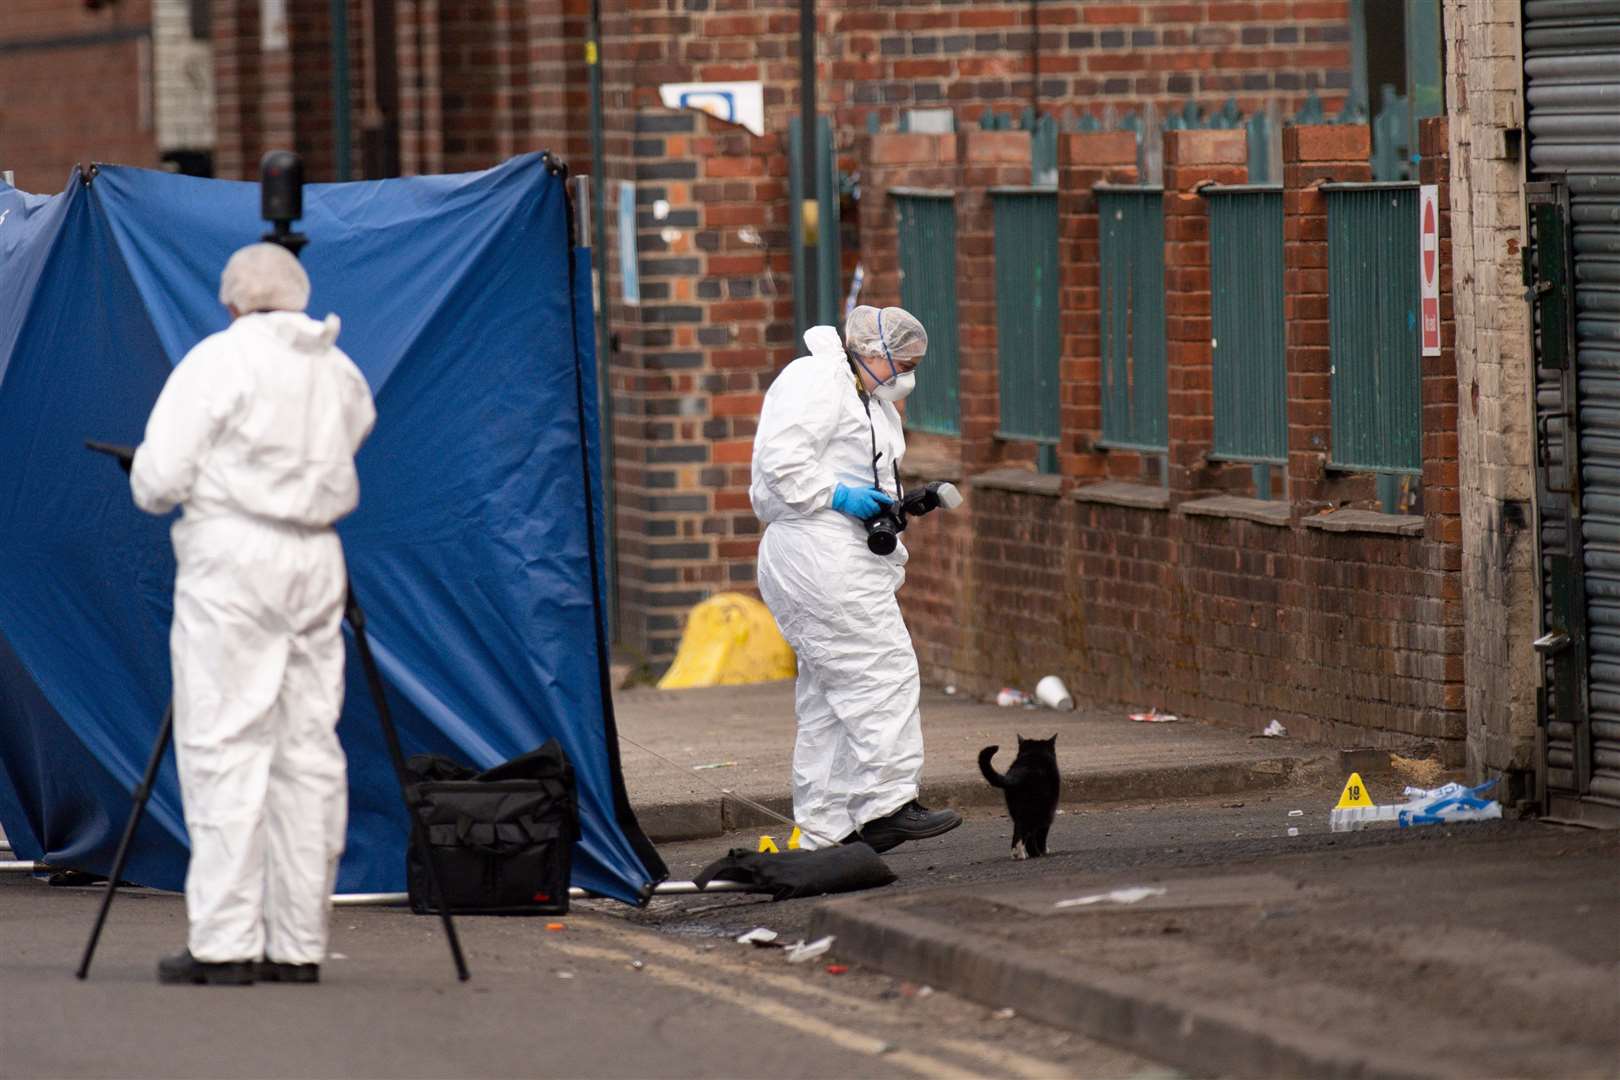 Forensic officers at the scene on Wednesday (Jacob King/PA)